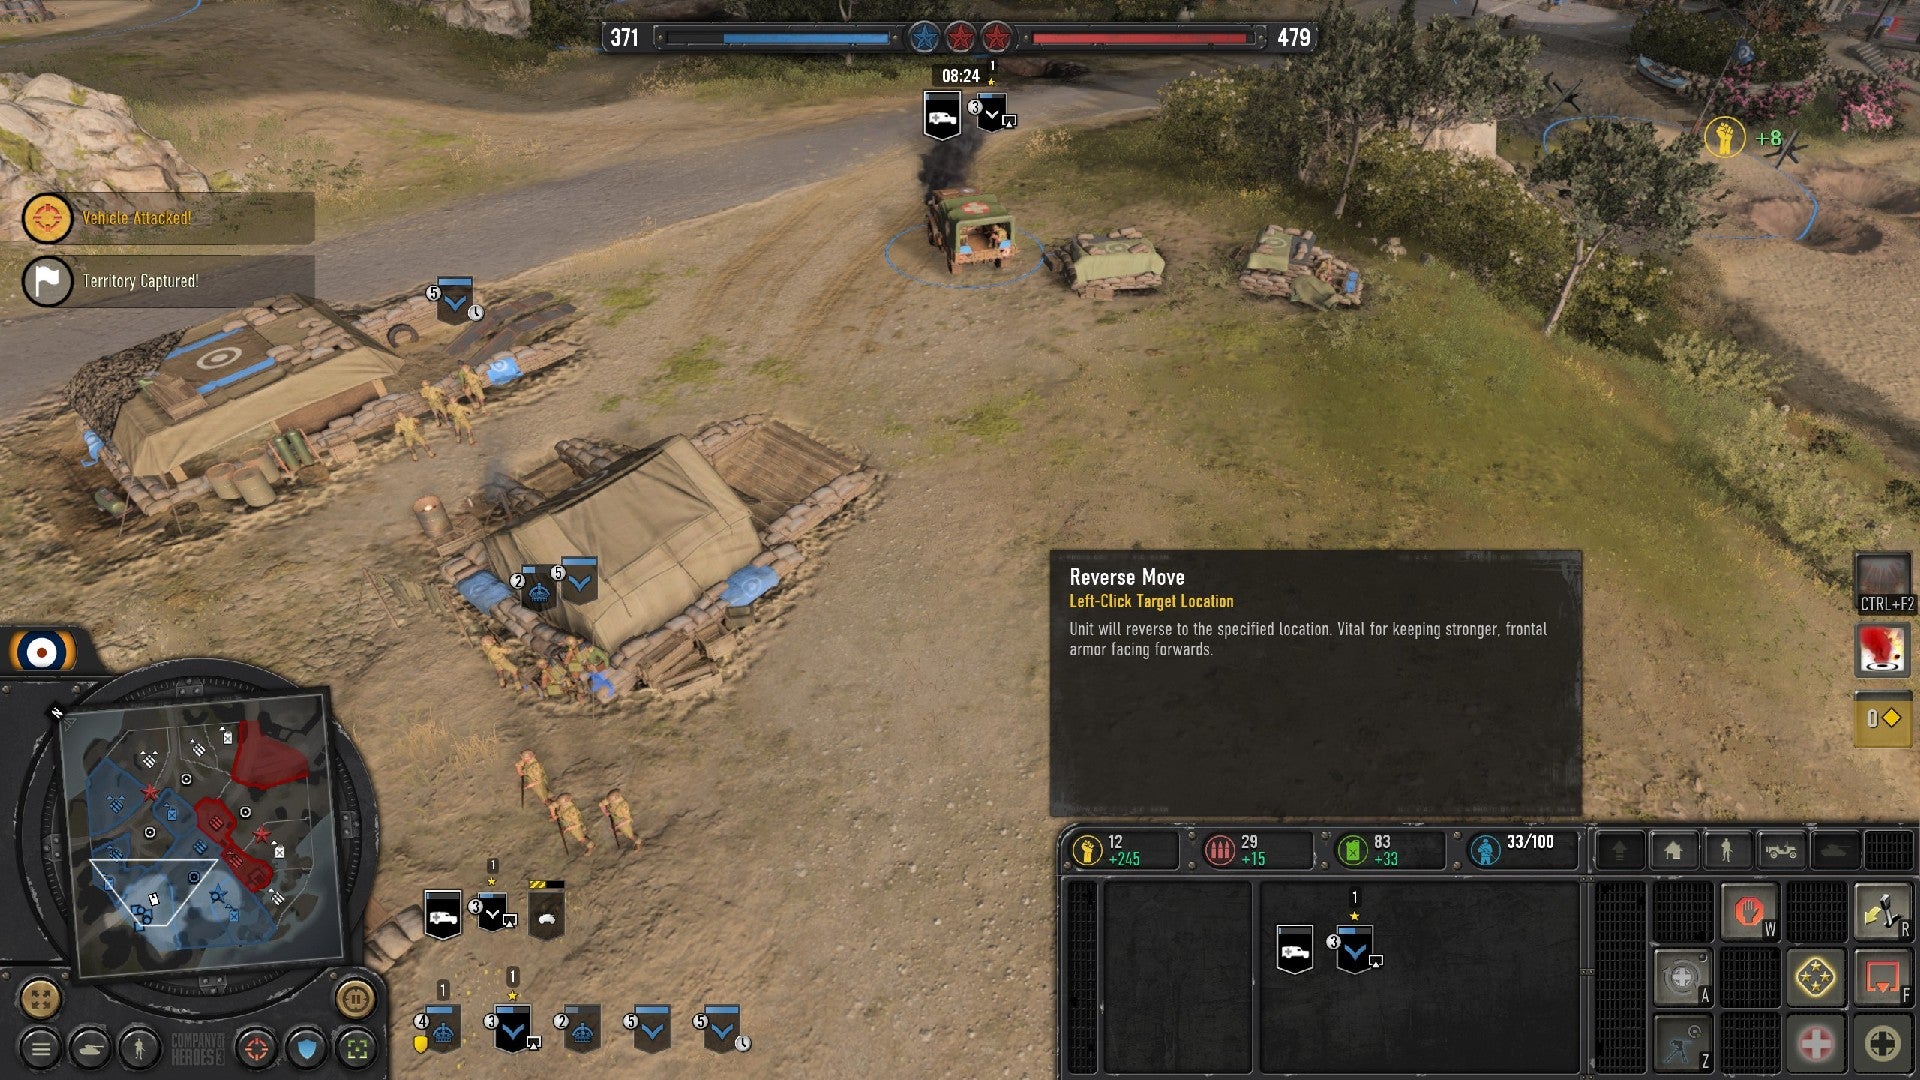 Company of Heroes 3 image showing a damaged truck reversing back into base, with the reverse tooltip in the bottom-right corner.